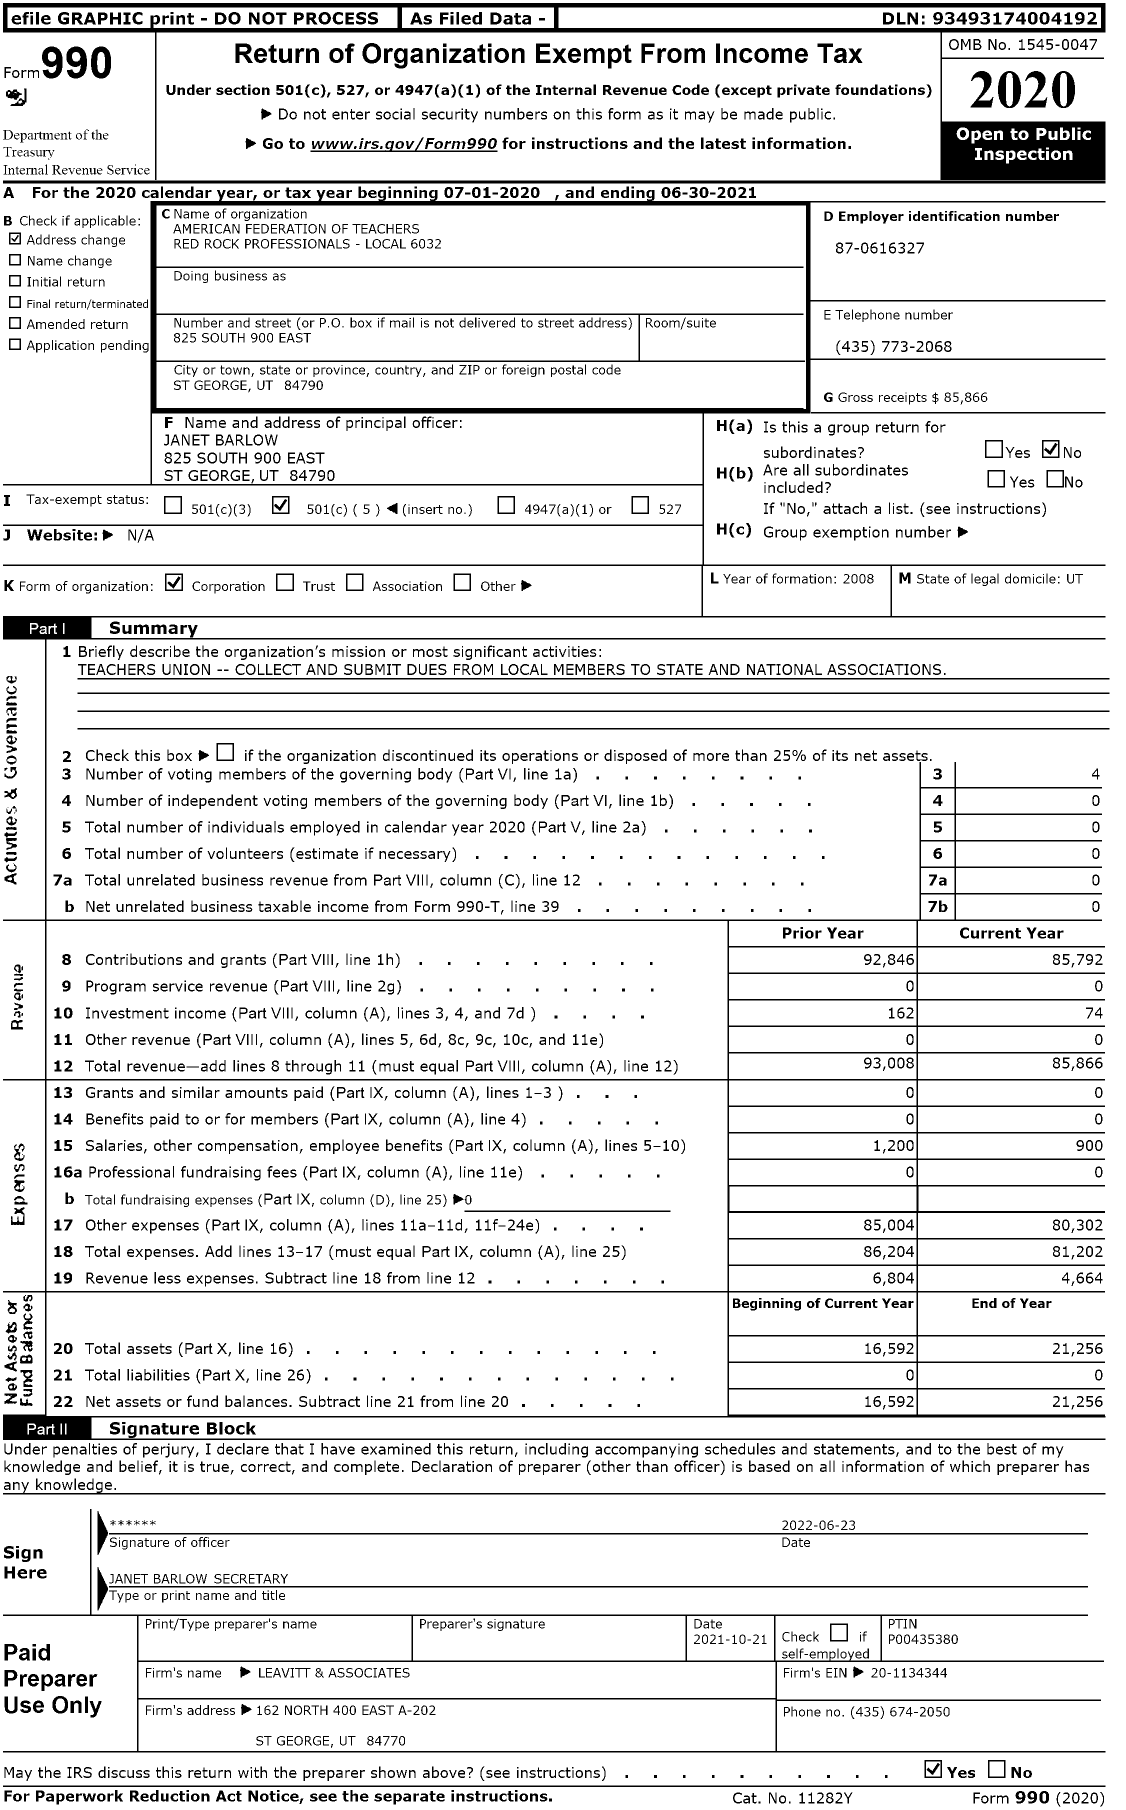 Image of first page of 2020 Form 990O for American Federation of Teachers - 6032 Red Rock Professionals